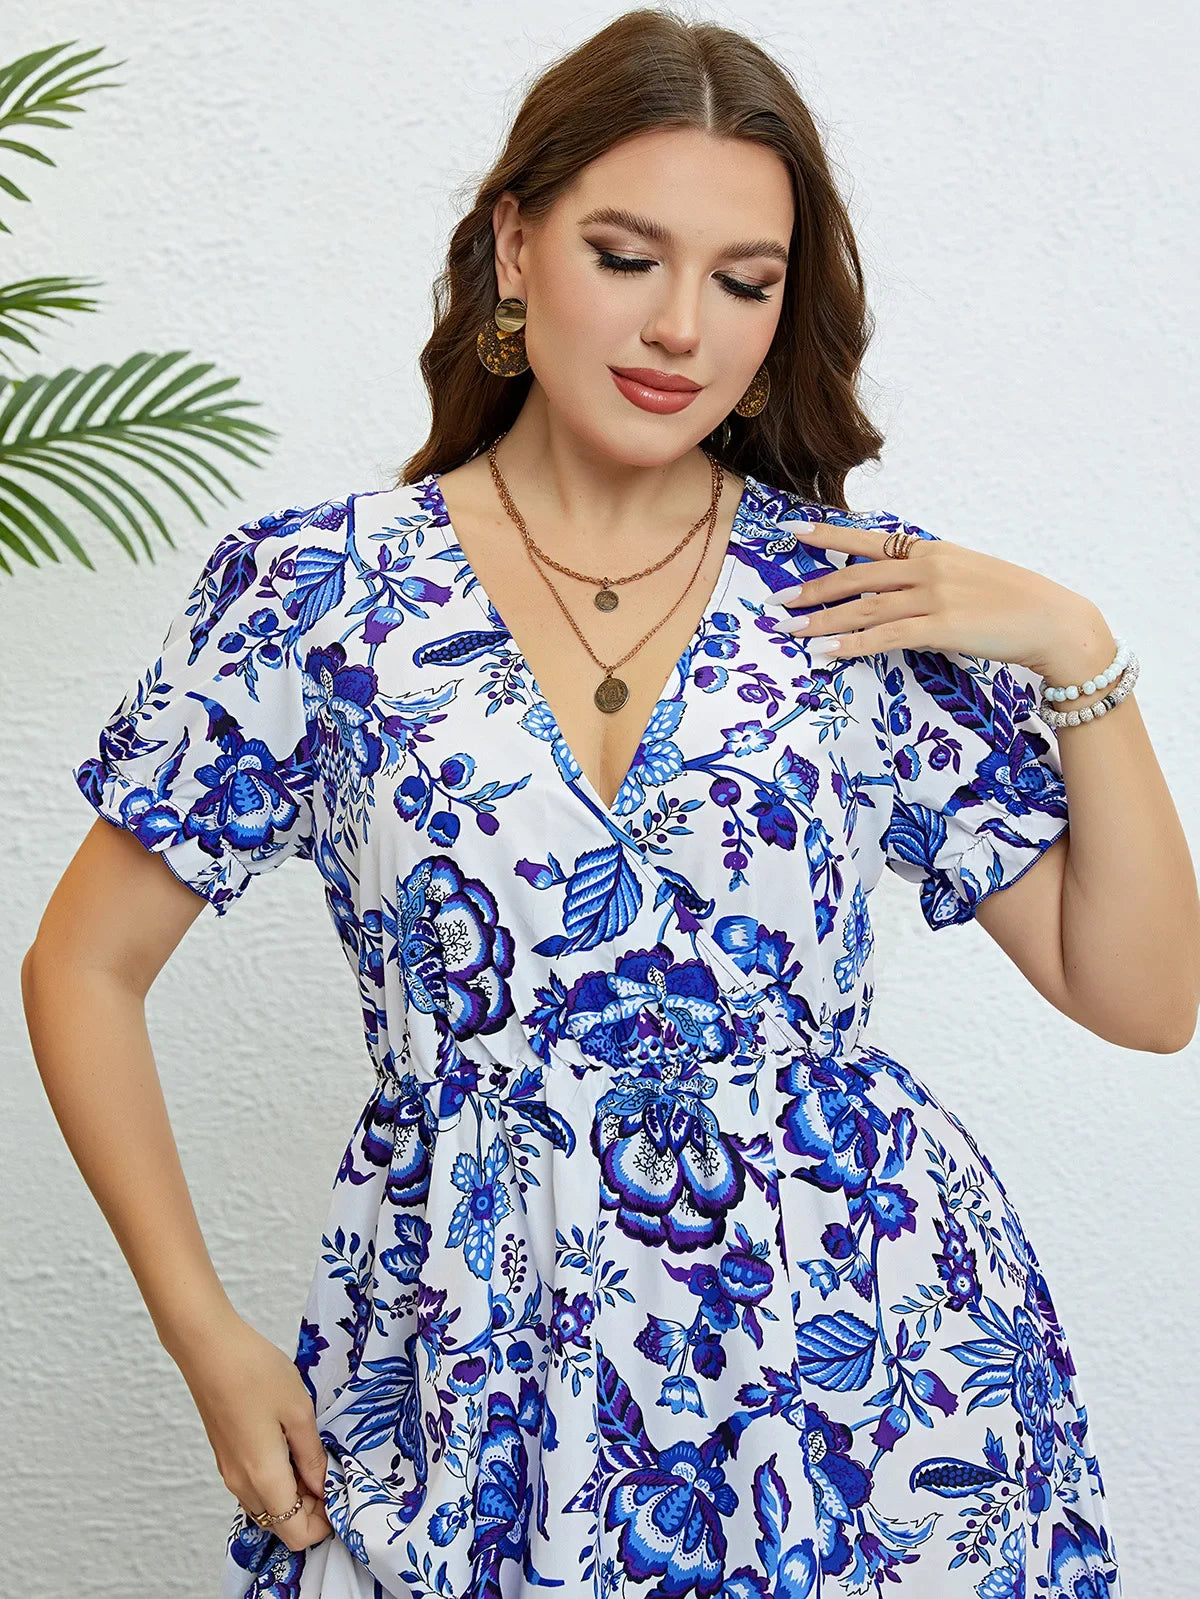 Plus Size Women Flower Print V-Neck A-Line Dresses Elegant Ruffle Short Sleeves Party Robe Casual Lady Vacation Large Size Cloth